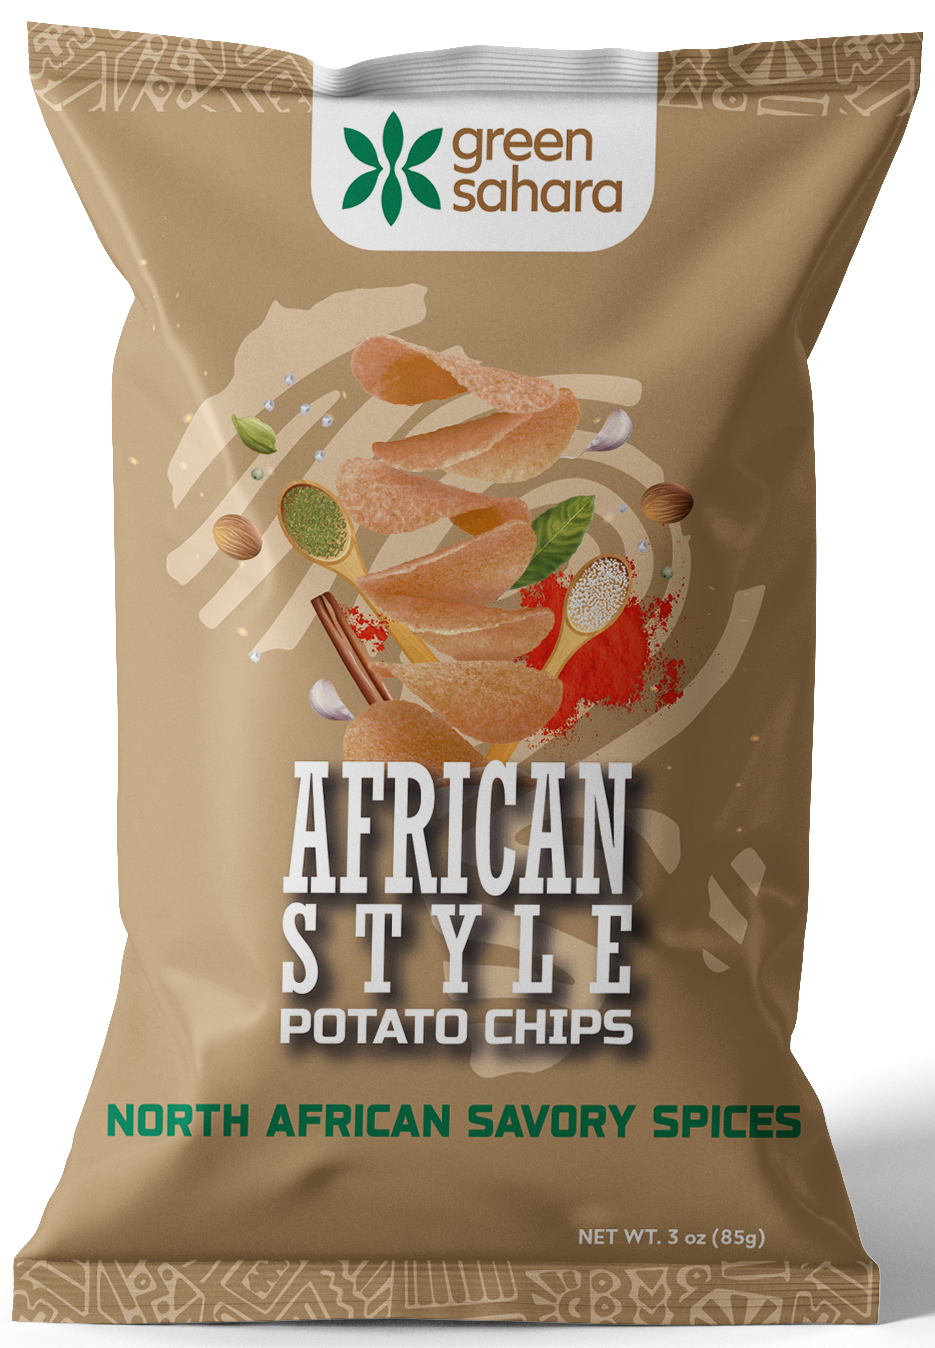 North African Savory Spices Potato Chips (3 Pack)